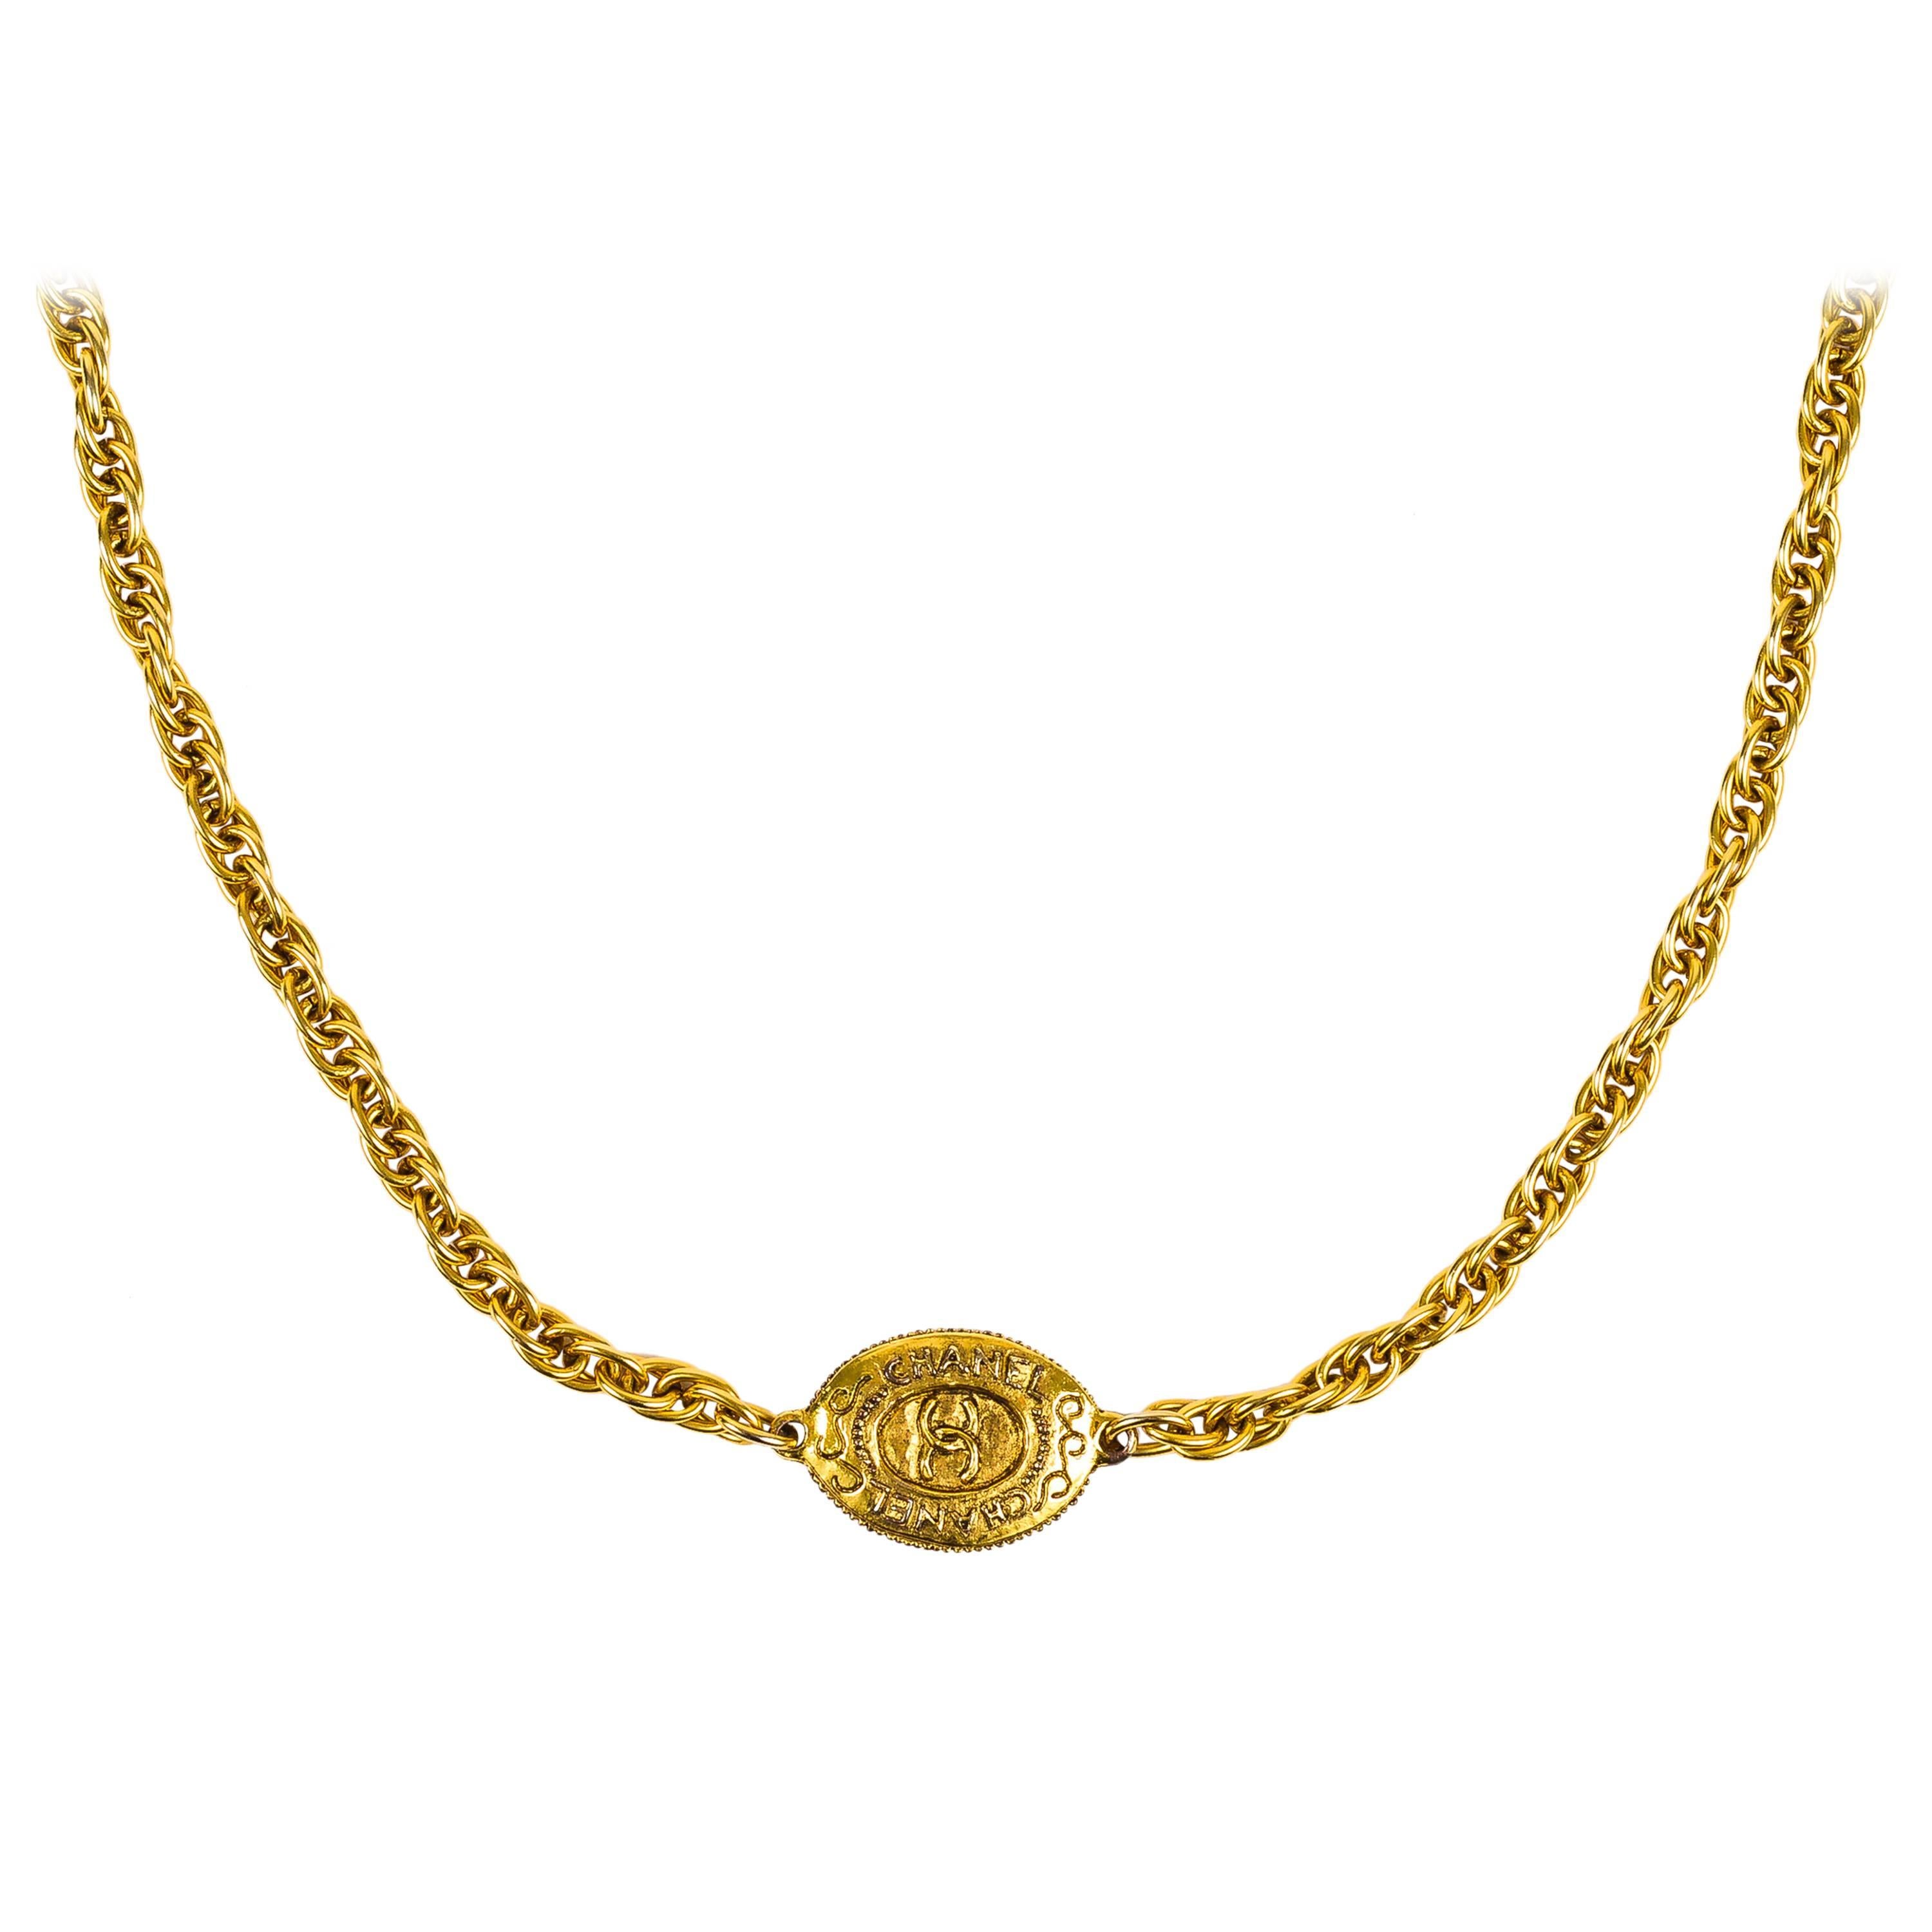 Vintage Chanel Gold Tone 'CC' Oval Station Single Strand Chain Necklace For Sale